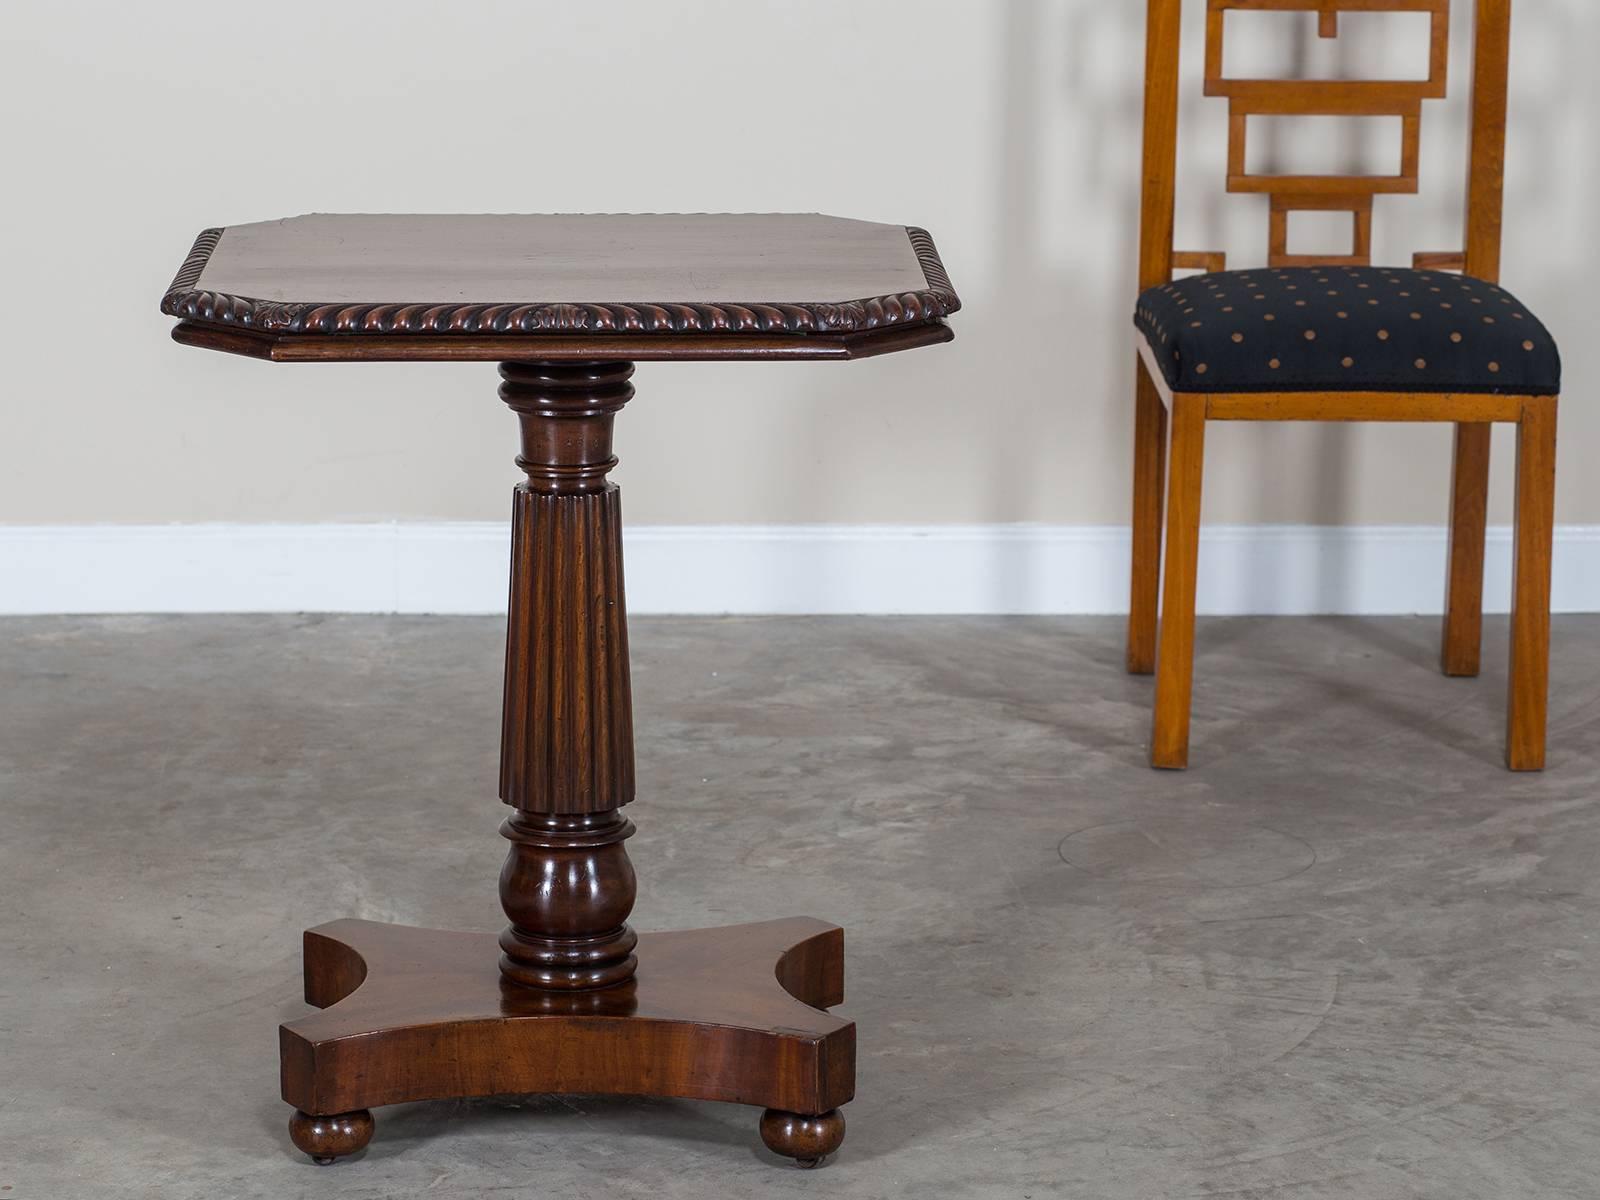 Receive our new selections direct from 1stdibs by email each week. Please click Follow Dealer below and see them first!

This antique English table circa 1835 has an unexpected feature beyond the handsome styling and details visible in the